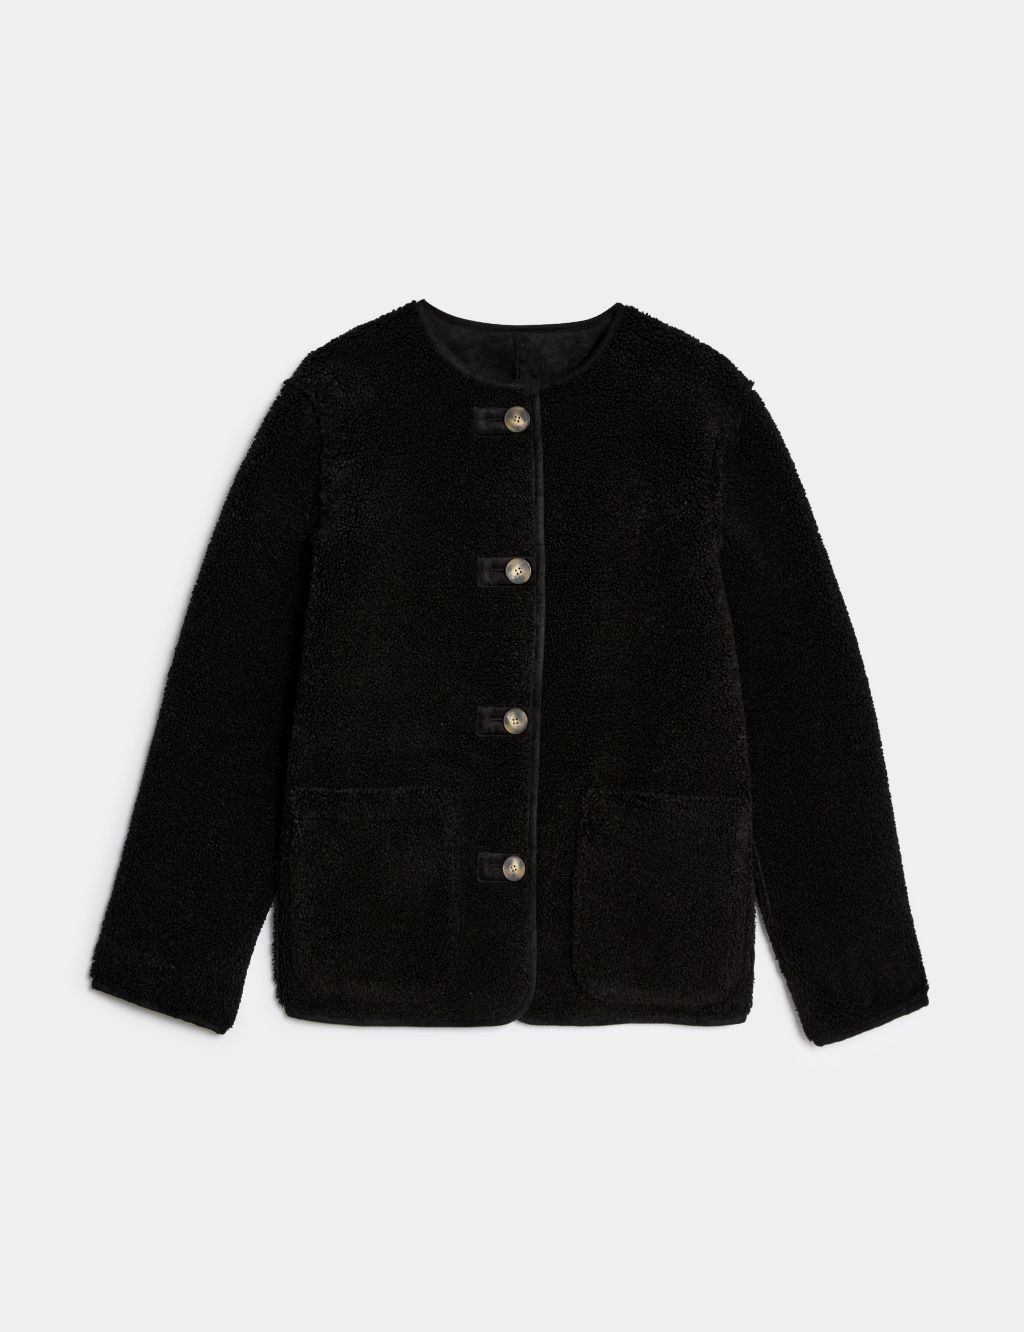 Faux Shearling Textured Reversible Jacket image 2